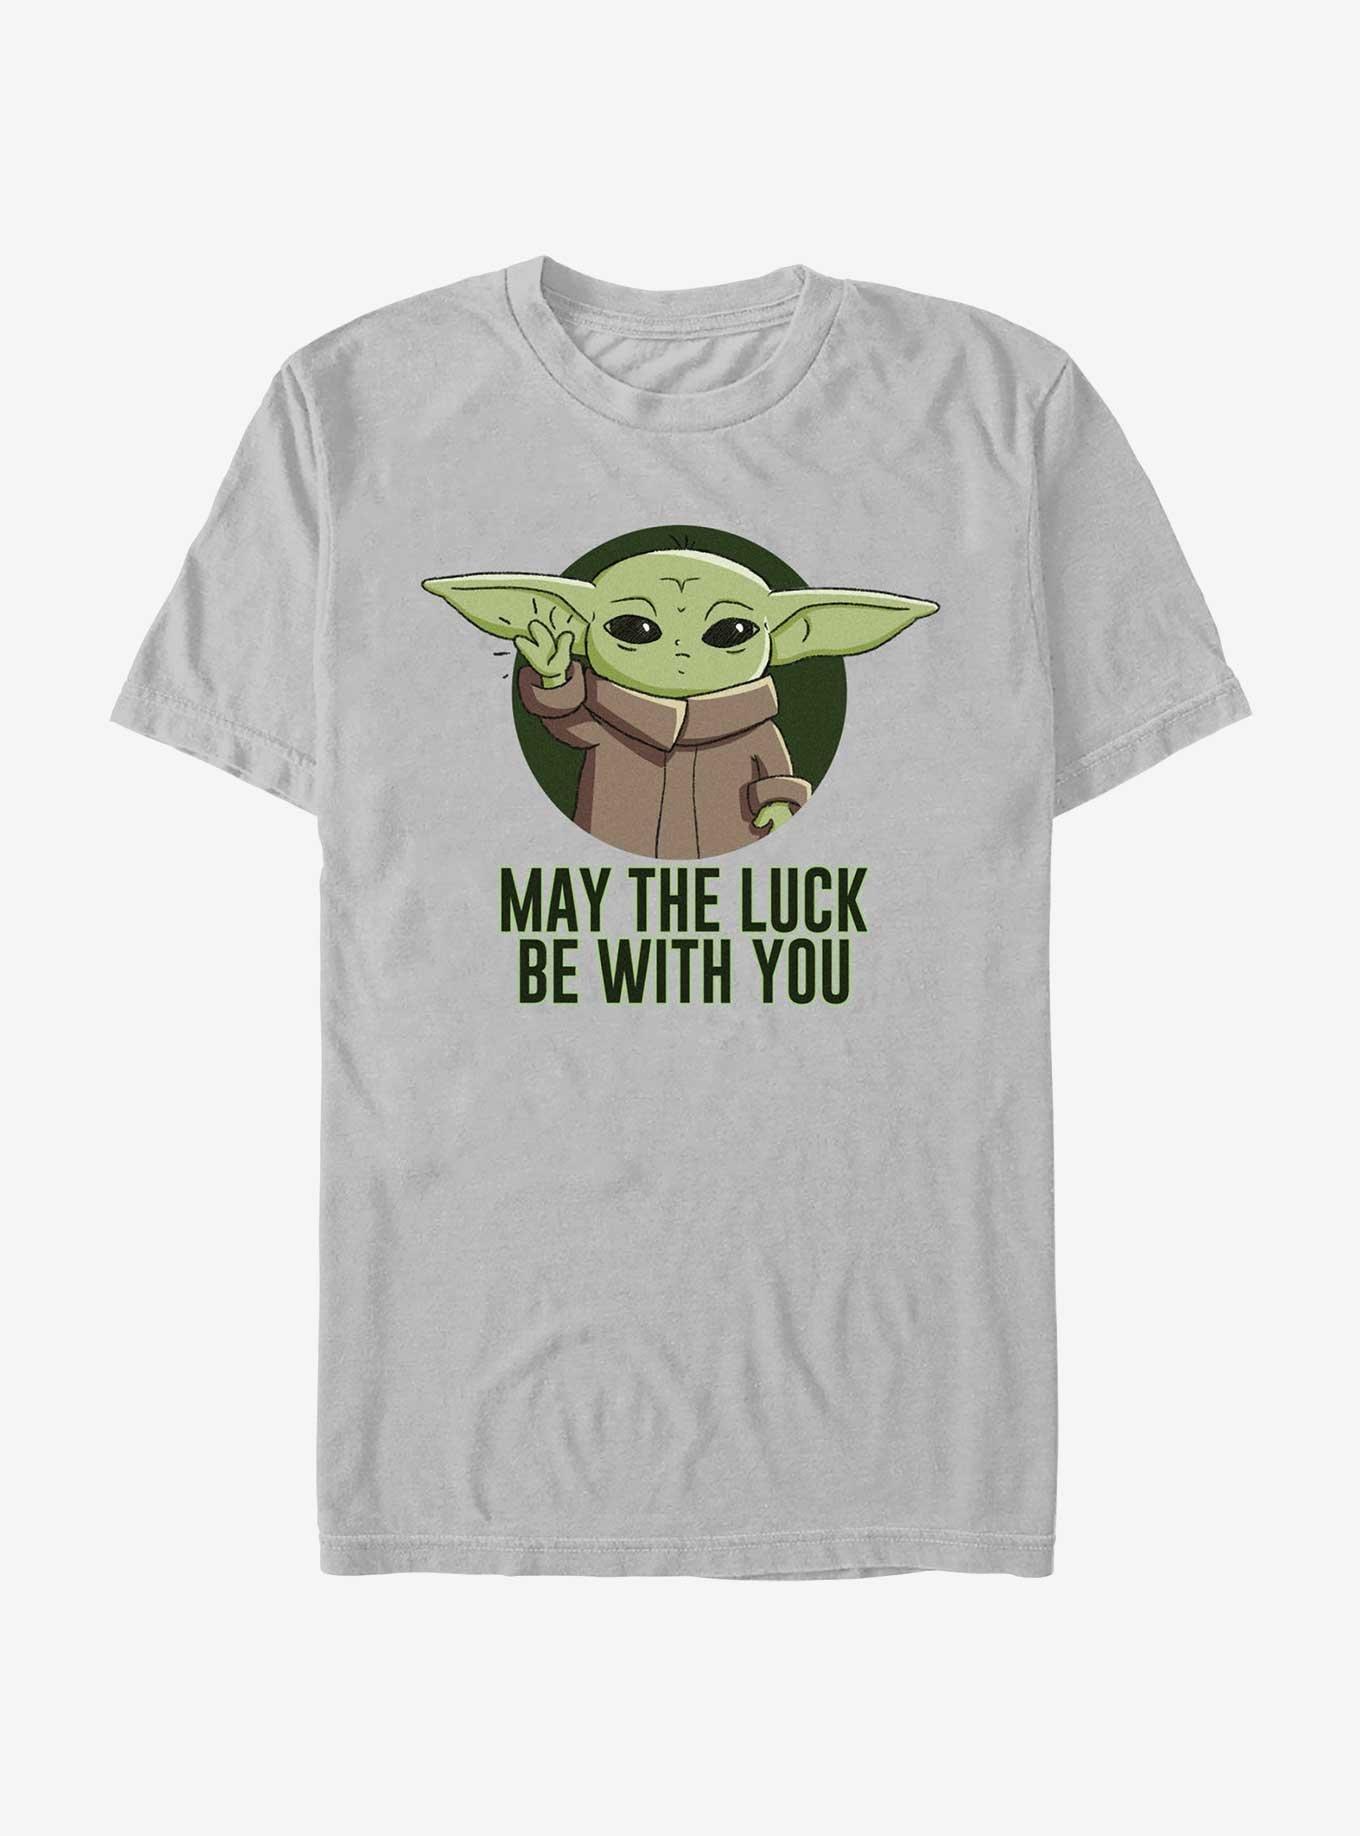 Star Wars The Mandalorian May The Luck Be With You T-Shirt, SILVER, hi-res